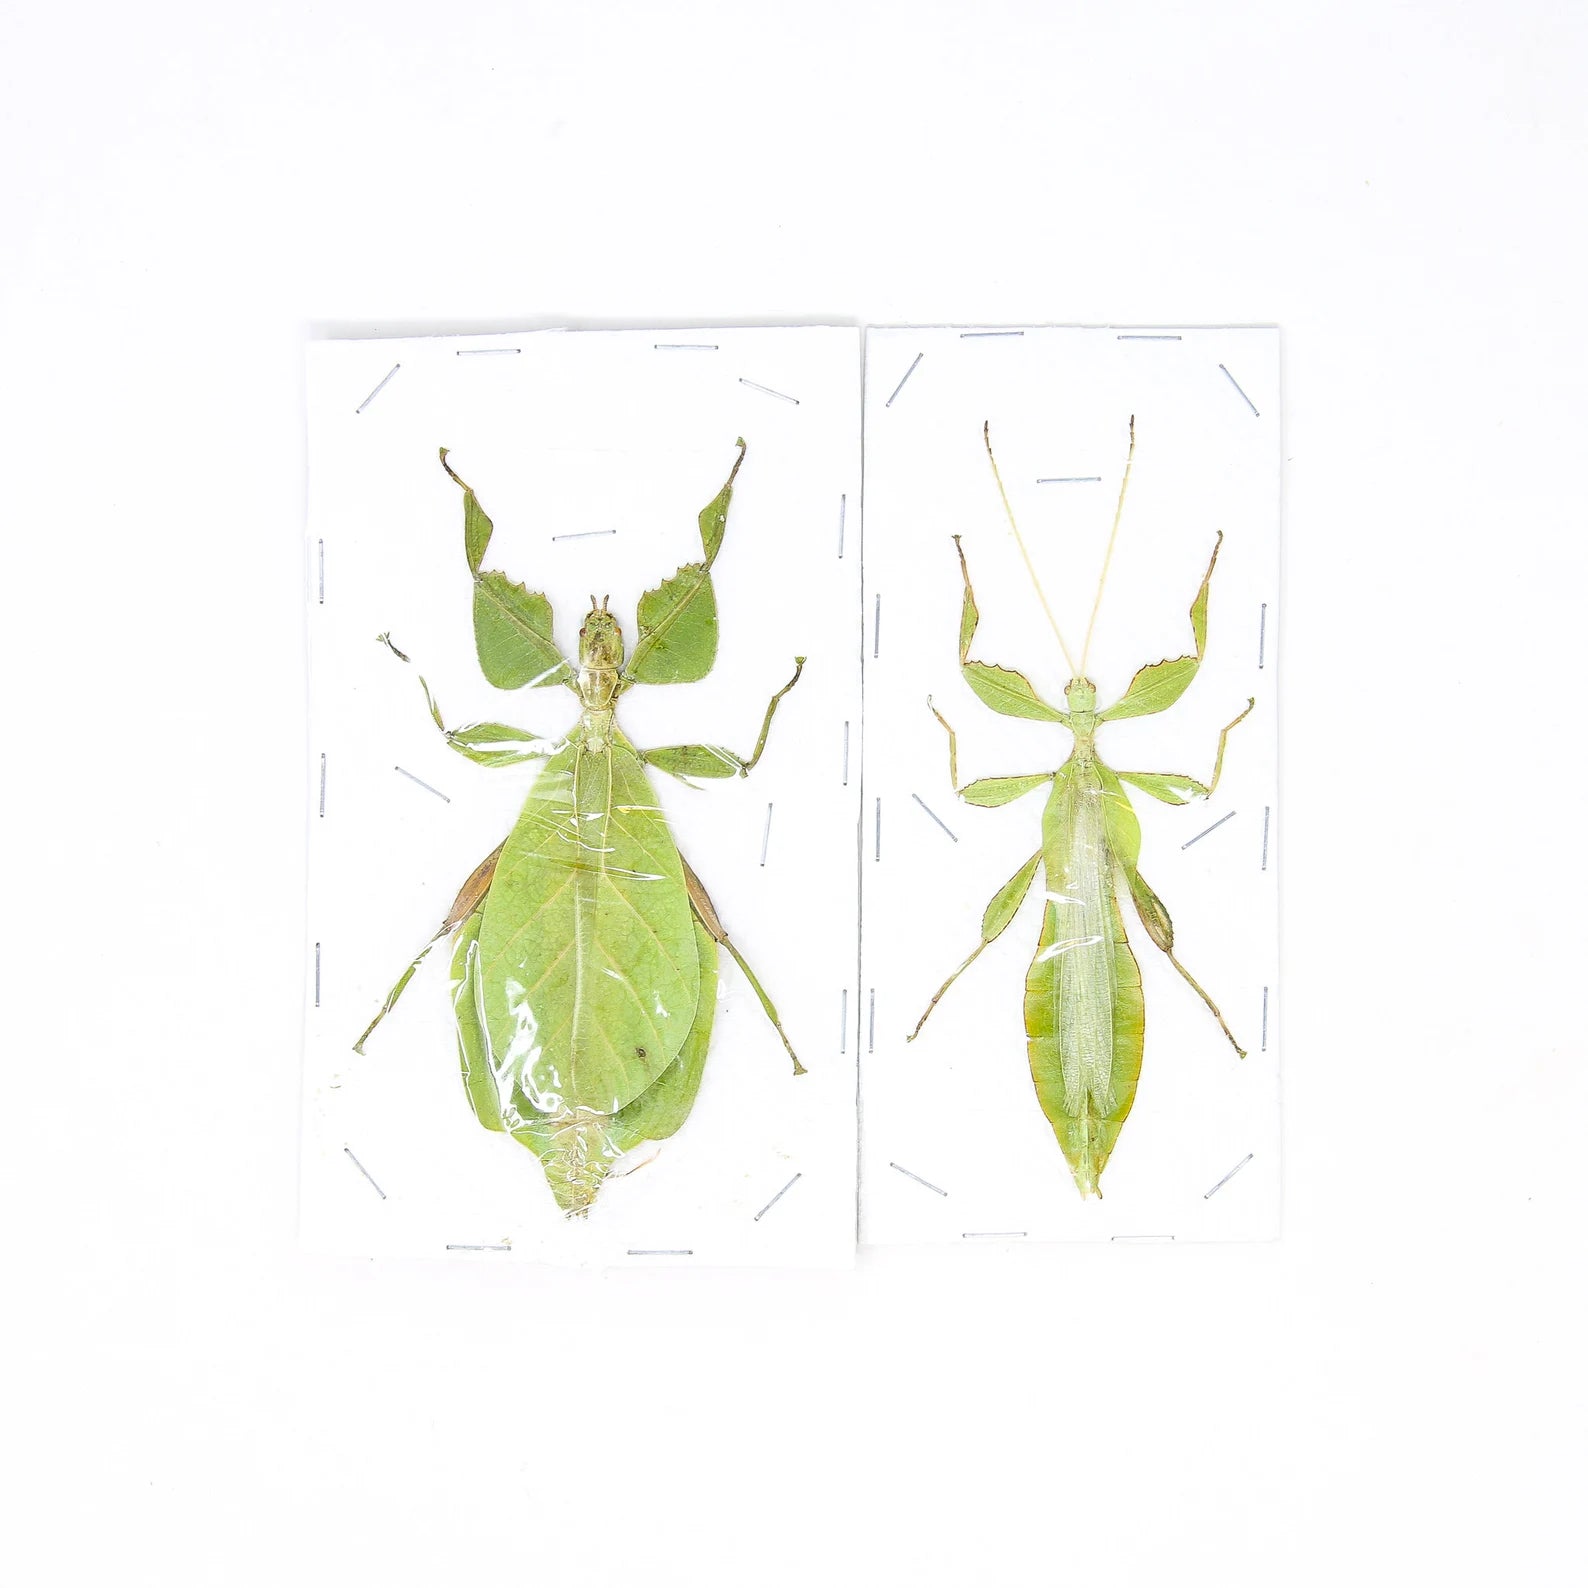 PAIR (2) Giant Leaf Insects, Phyllium celebicum, Unmounted Spread Phasmids, Insect Specimens for Collecting, Art, Entomology